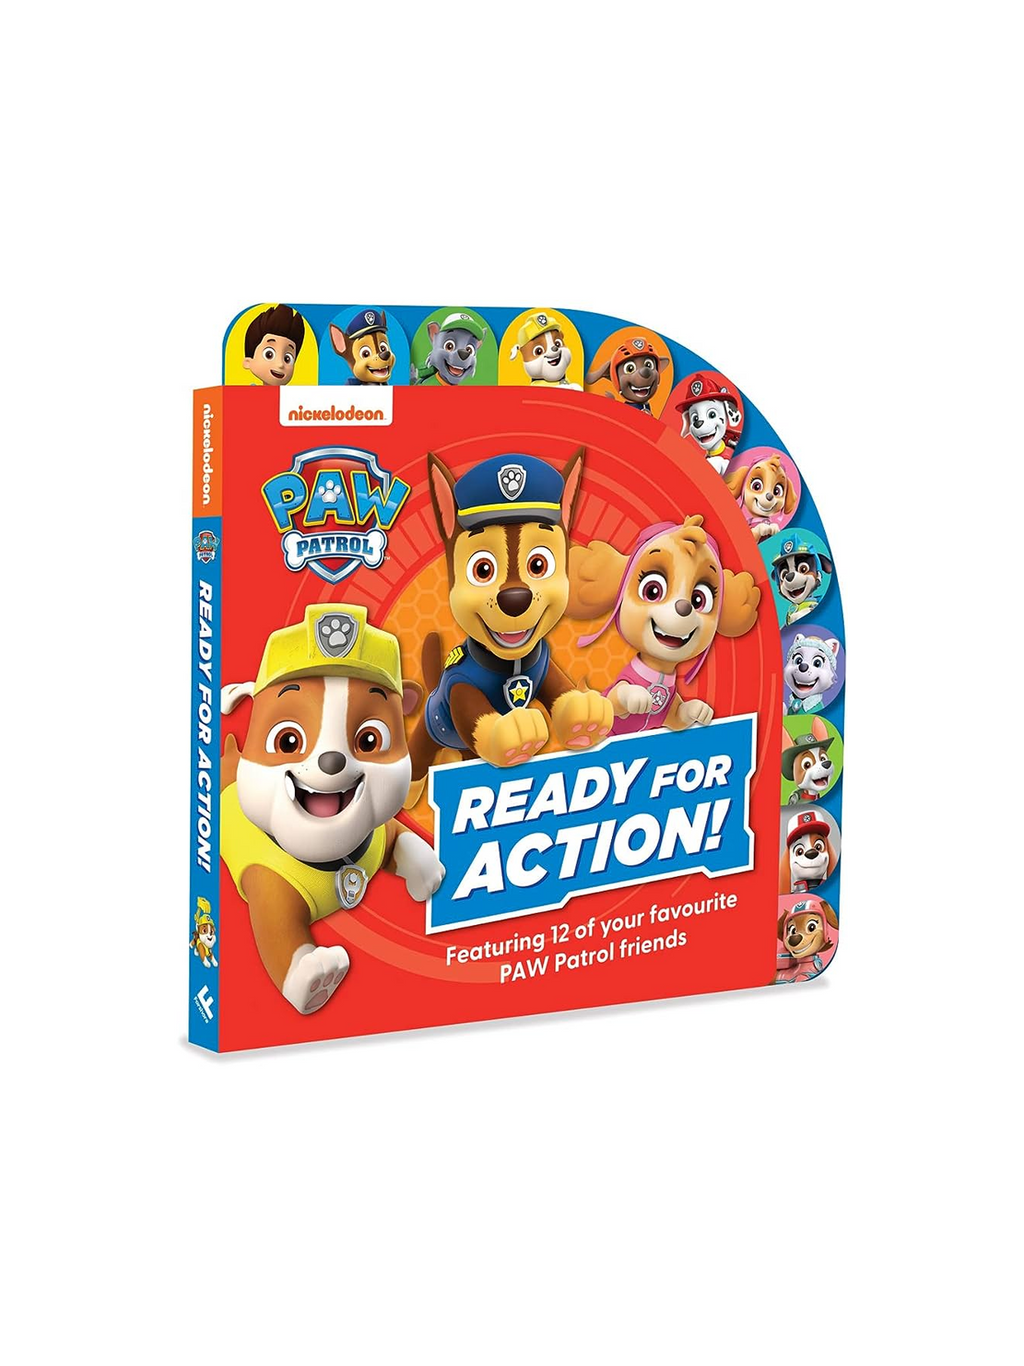 PAW Patrol: Ready for Action!